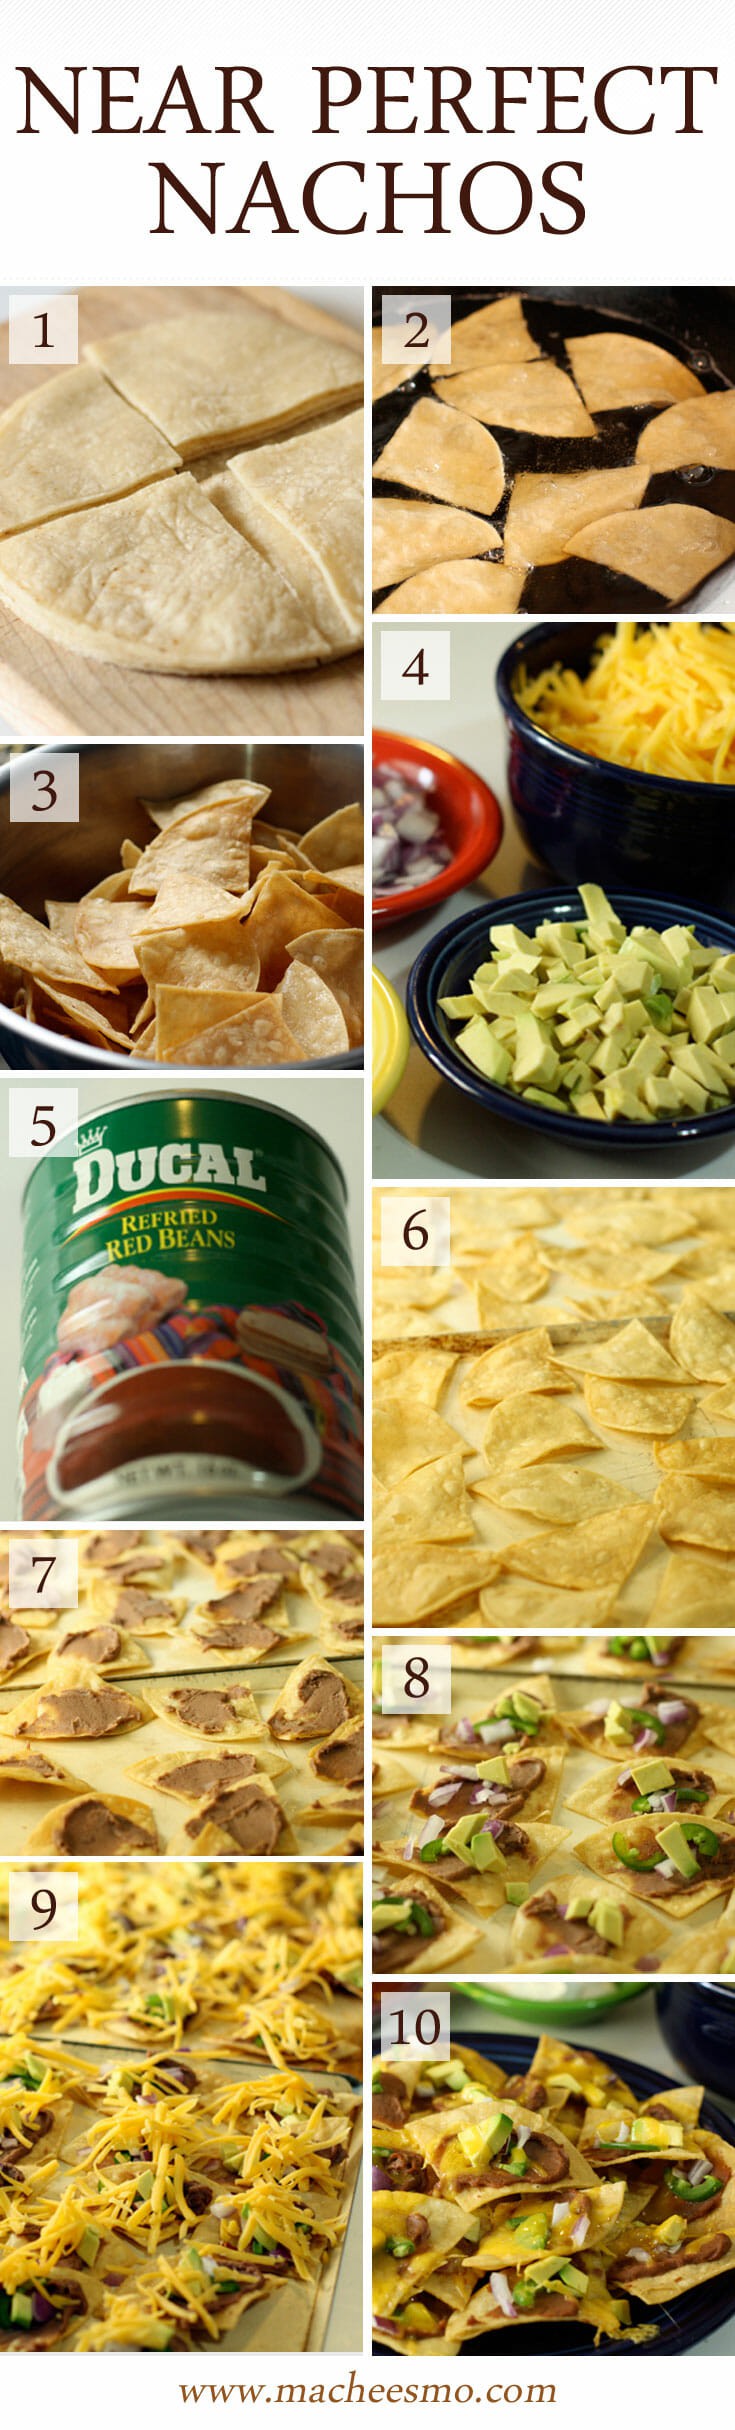 Near Perfect Nachos: The way to make really great nachos for a special occasion is to make your own chips and top them individually. Yep... you read that right! It's not so hard though and is worth the work!